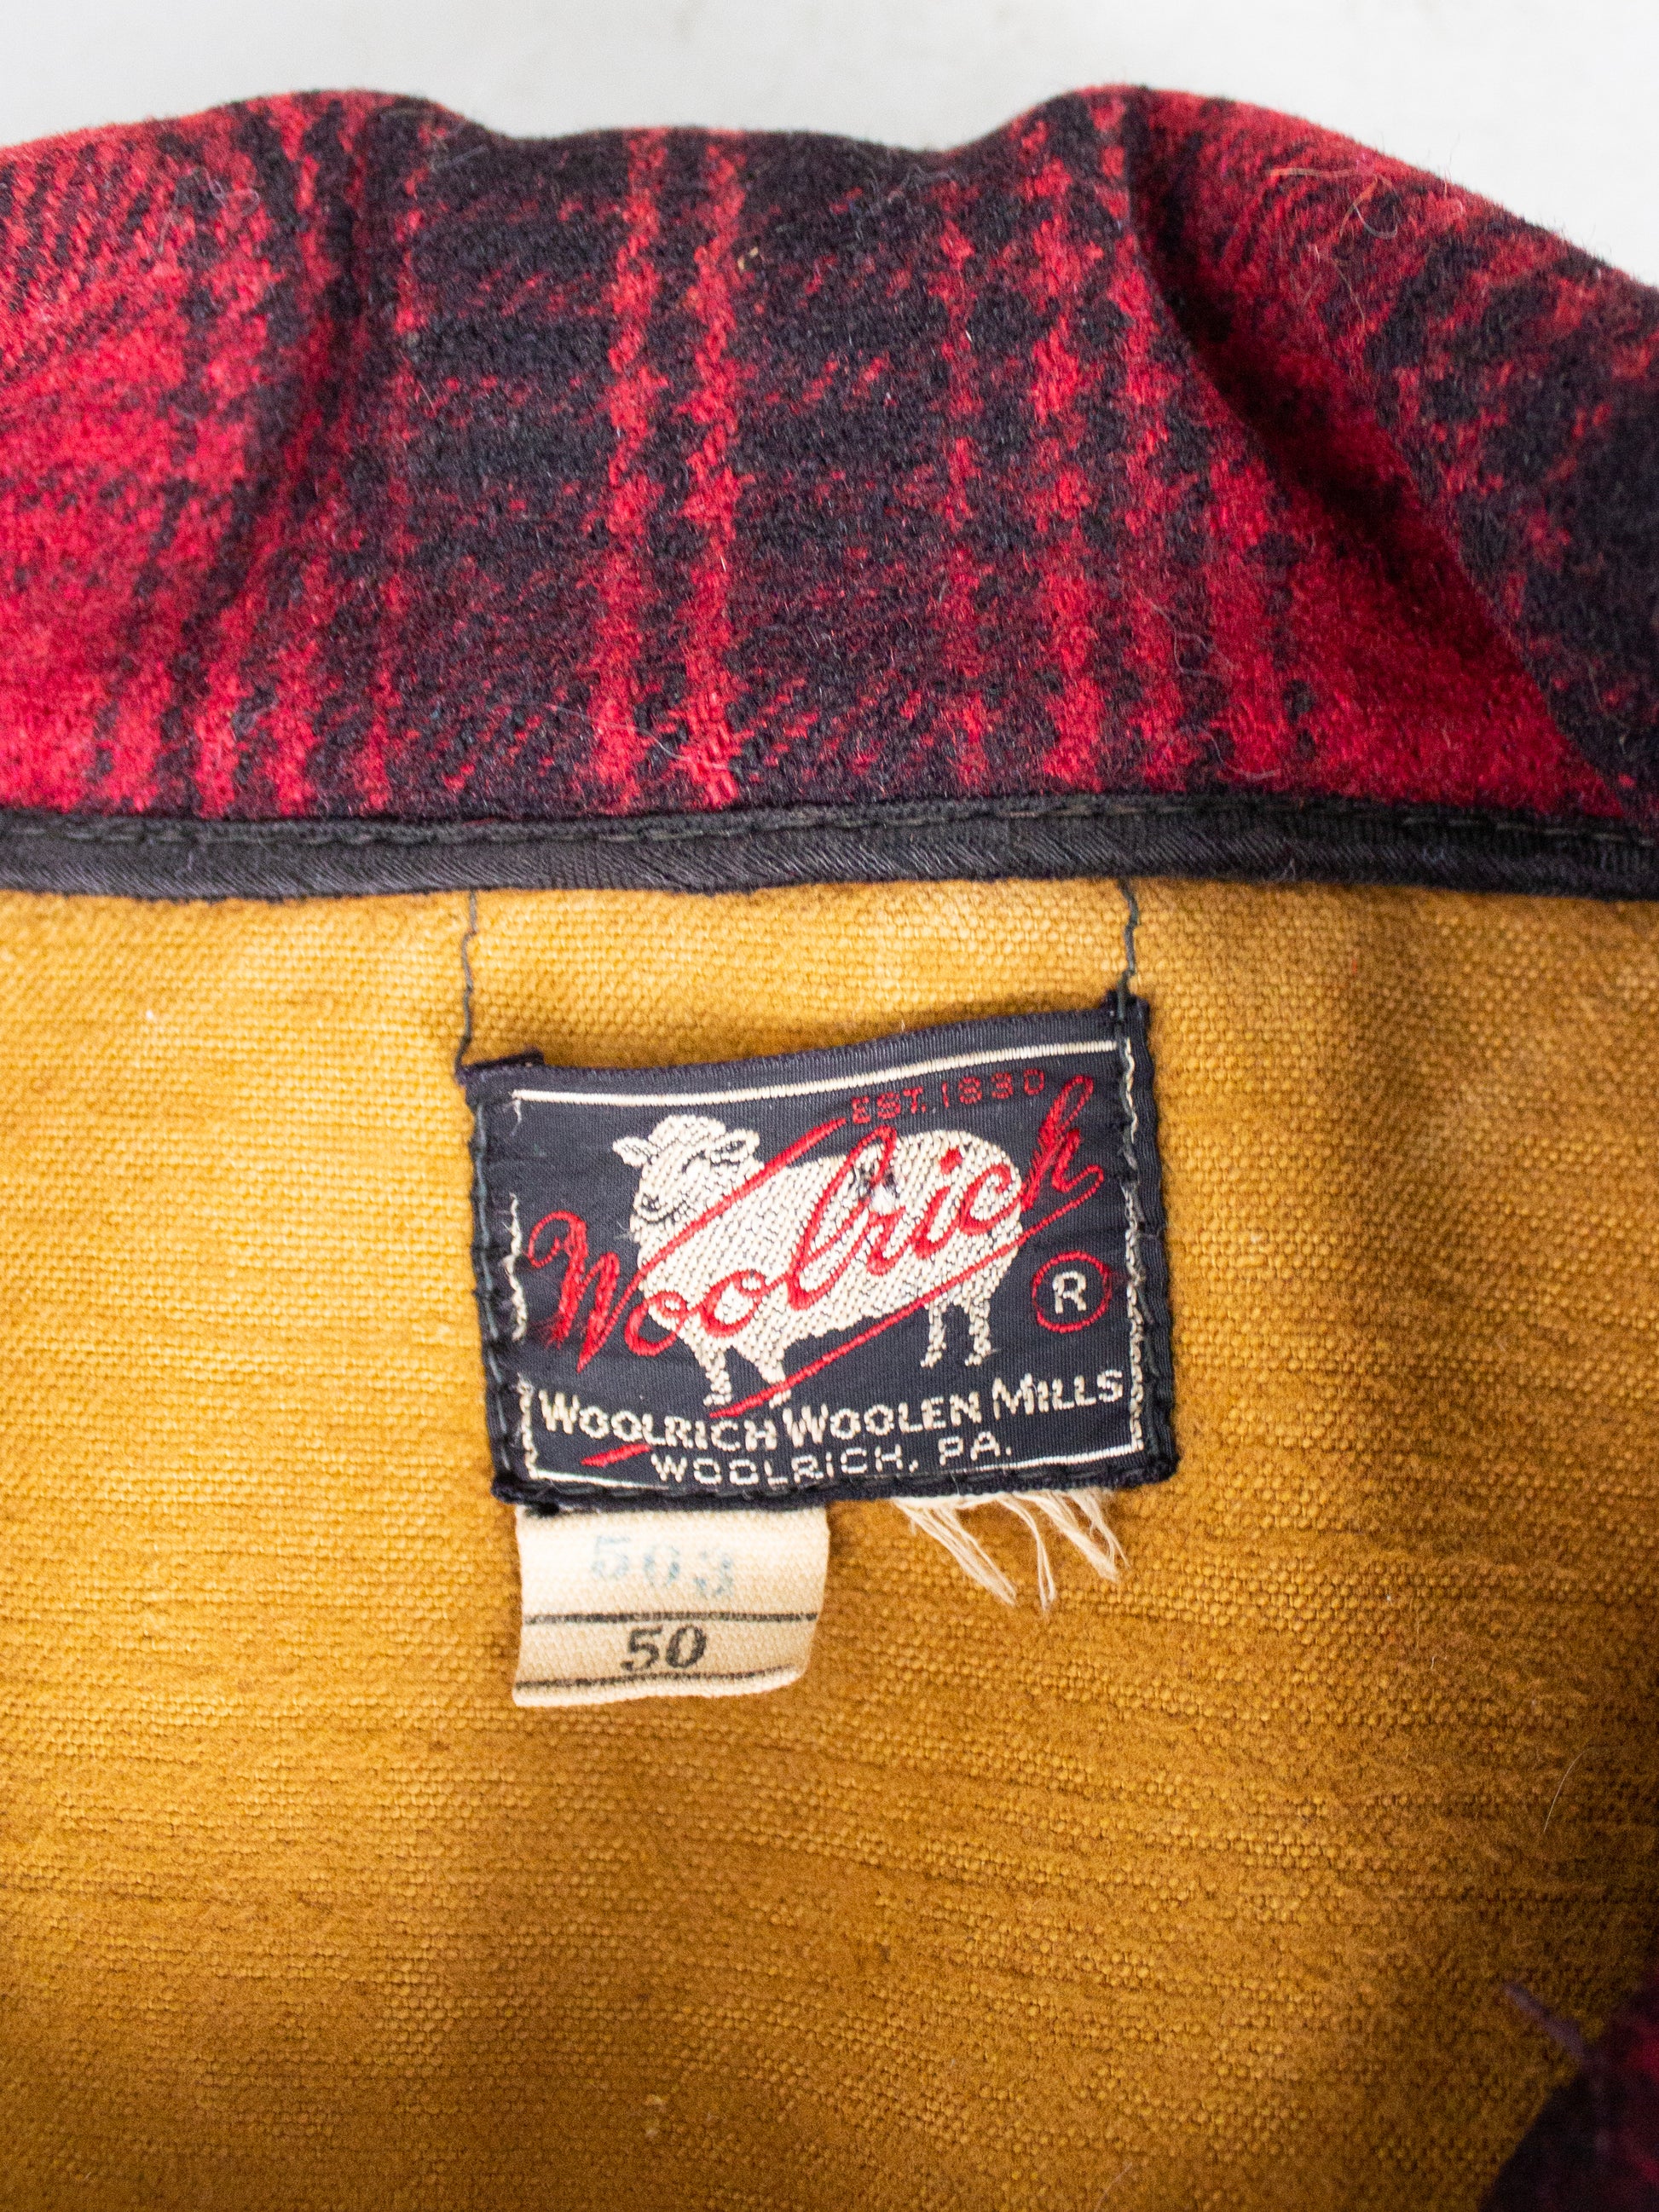 Vintage 1950's Woolrich Red Buffalo Plaid Hunting Jacket Style 503